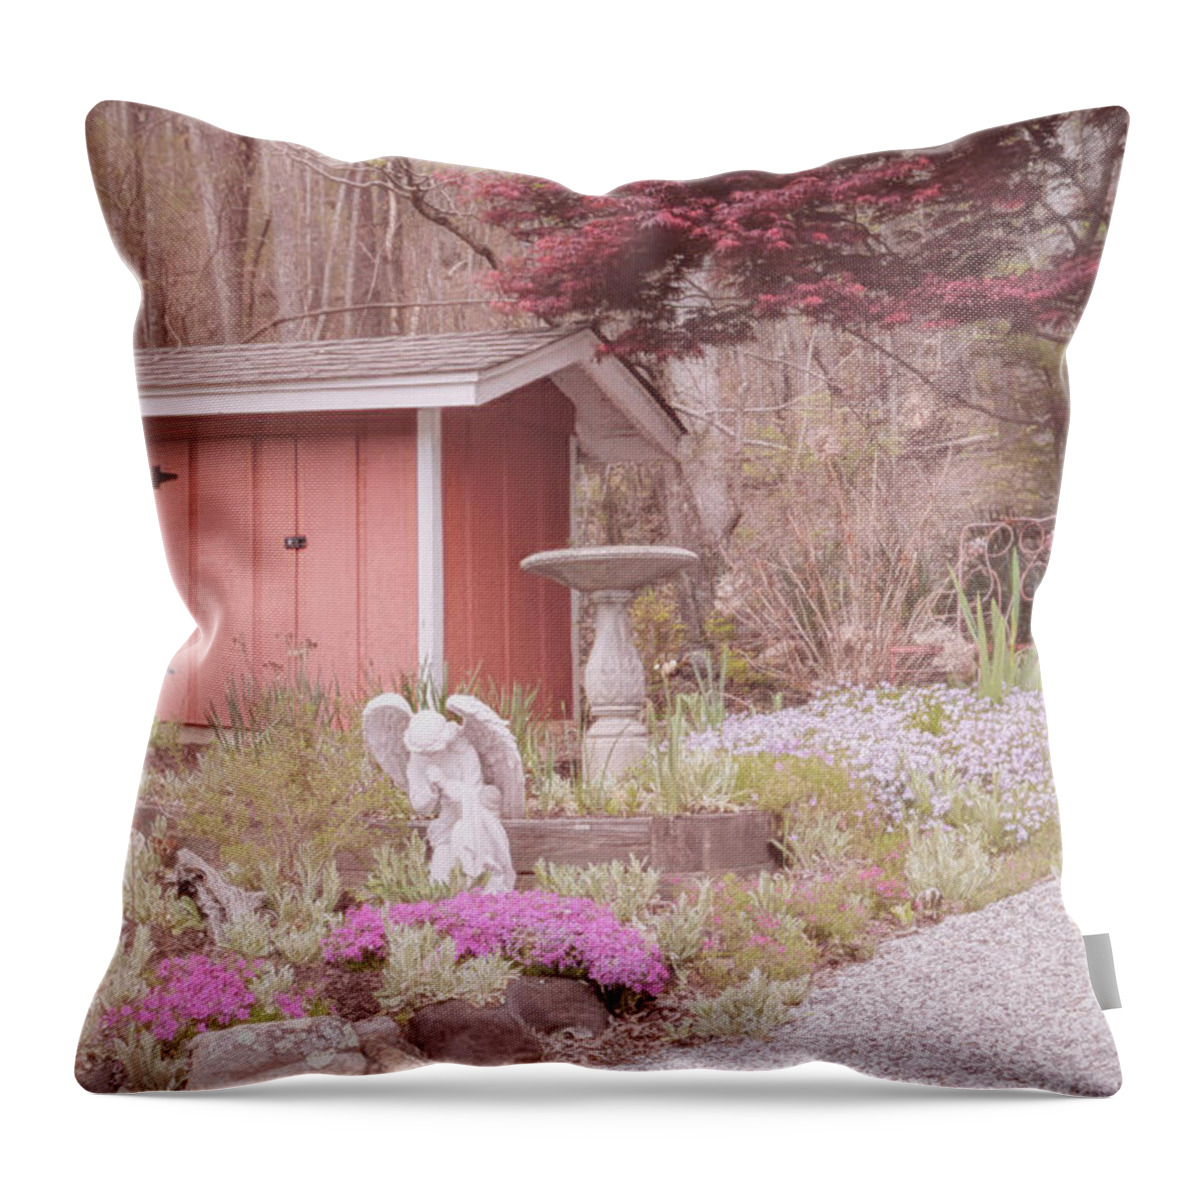 Barns Throw Pillow featuring the photograph Country Garden Angel by Debra and Dave Vanderlaan